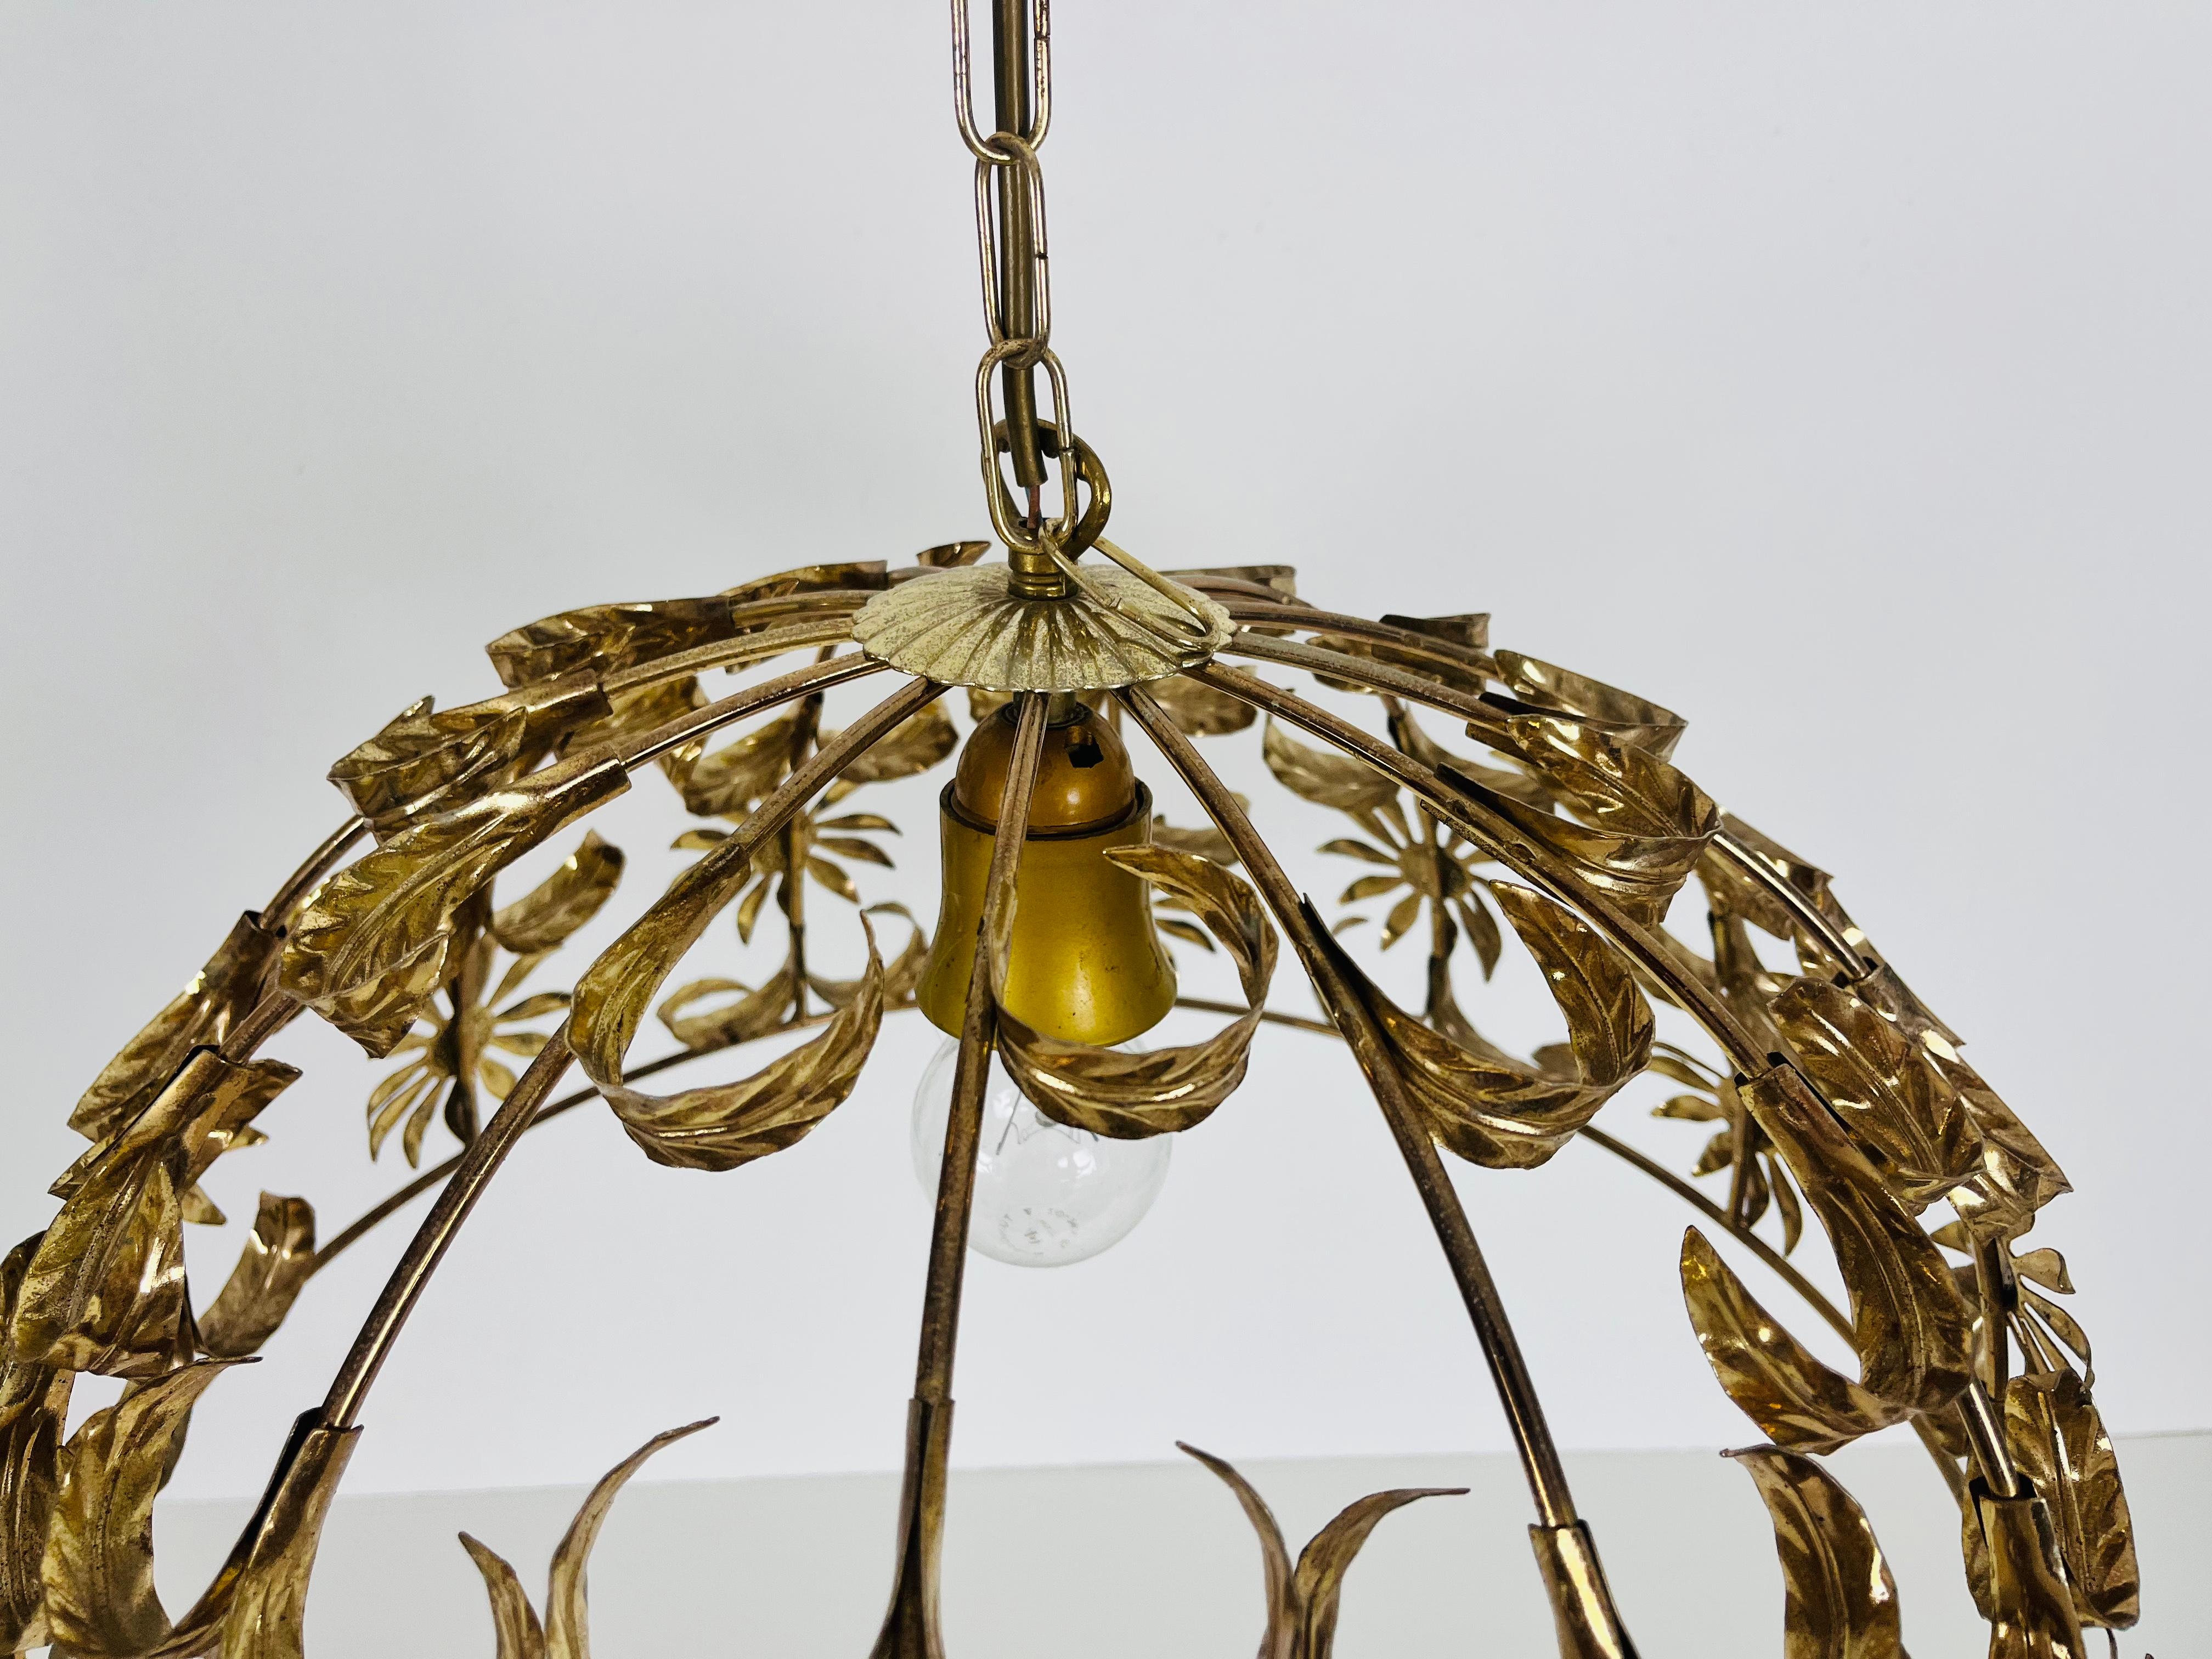 Florentine Flower Shape Pendant Lamp Attributed to Banci Firenze, 1970s For Sale 1